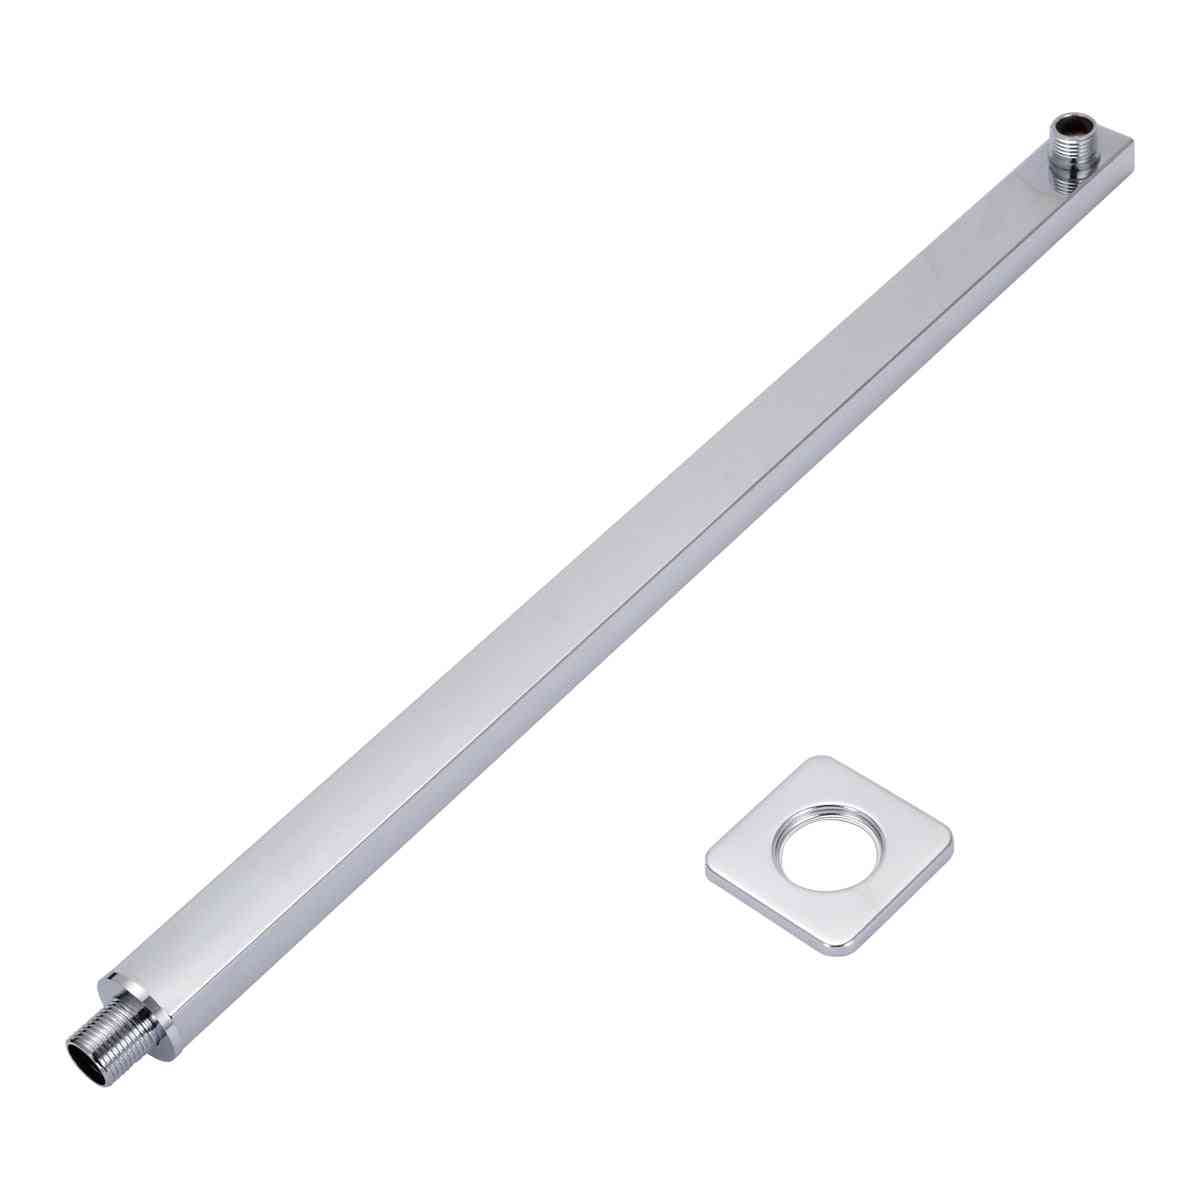 Wall Mounted Chrome Arm Square Shower Extension For Bathroom